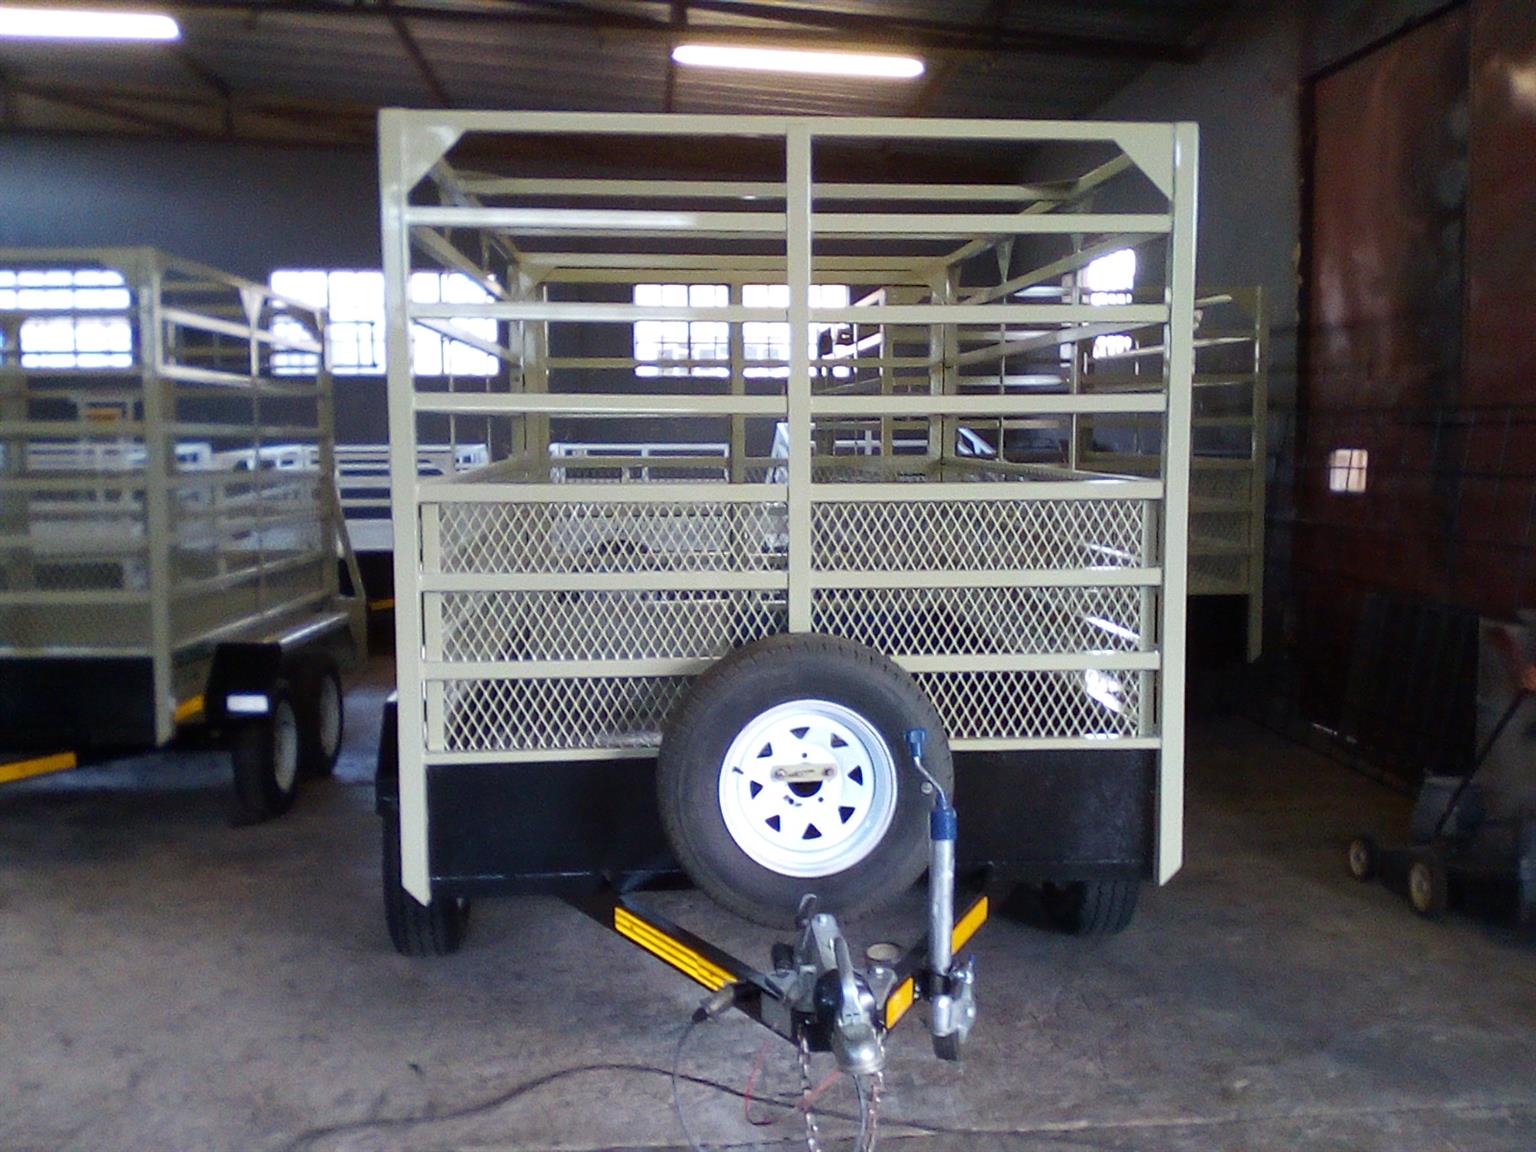 3m Cattle trailers for sale